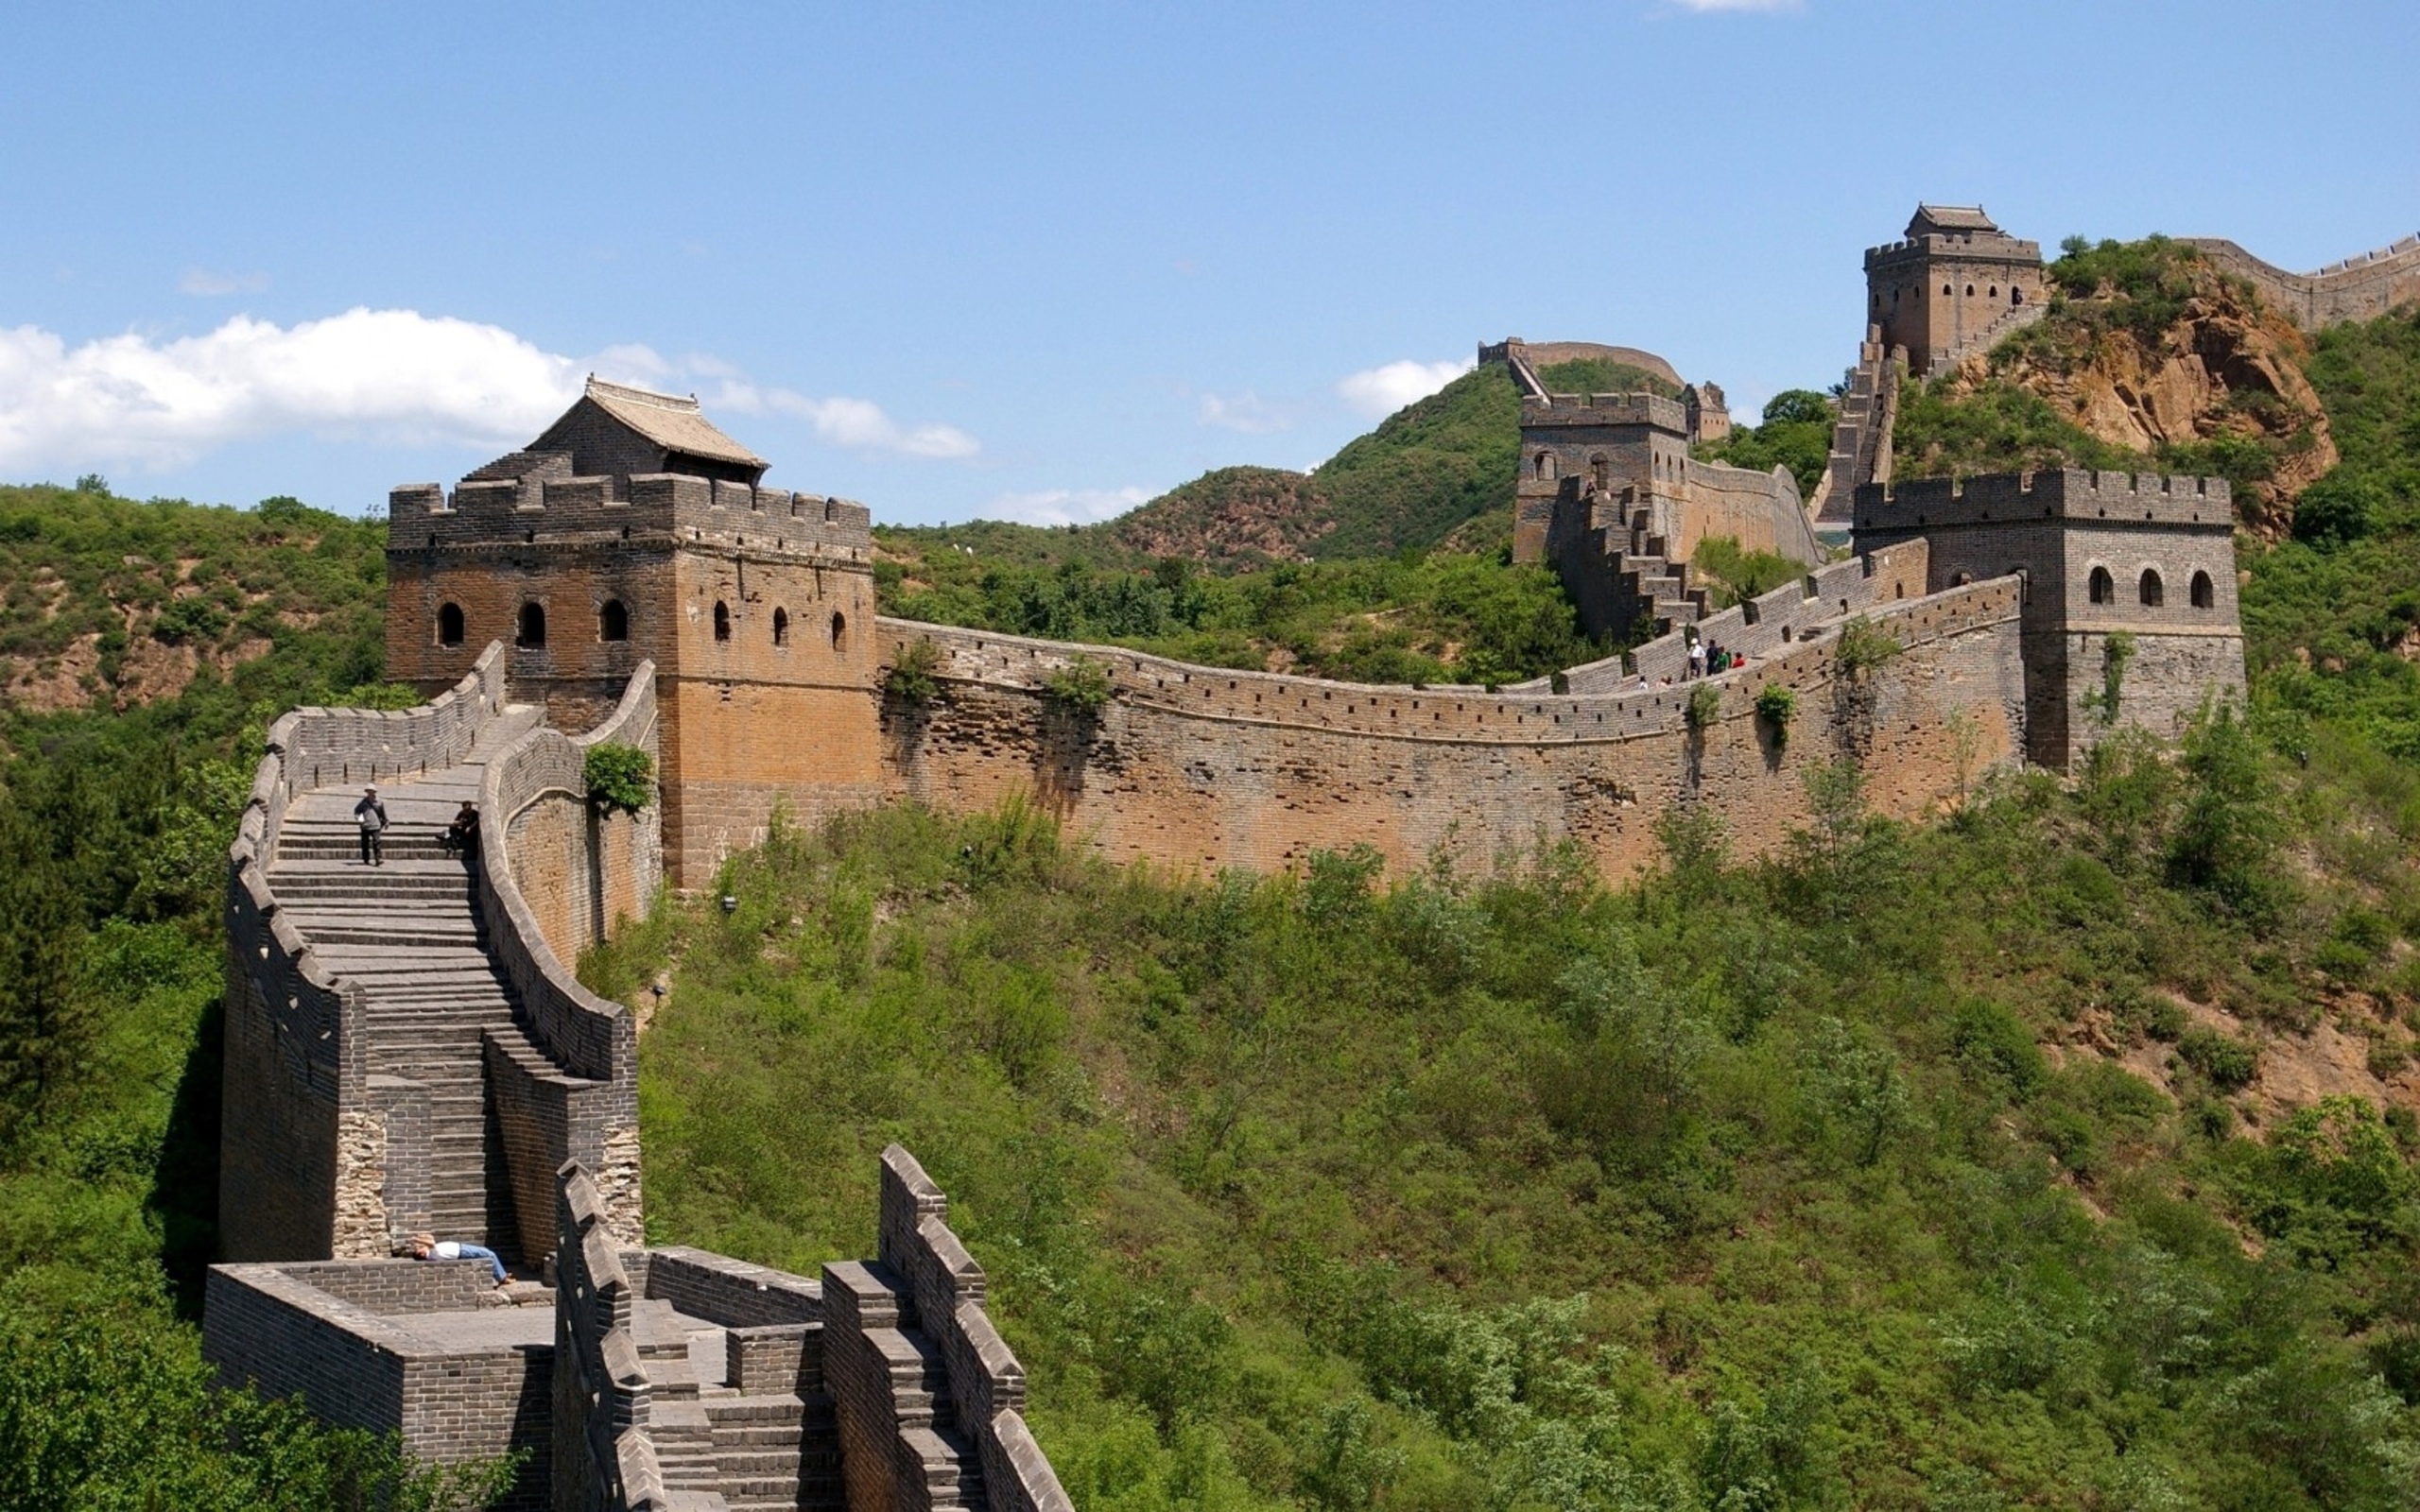 Great Wall Of China HD Wallpaper Background Image